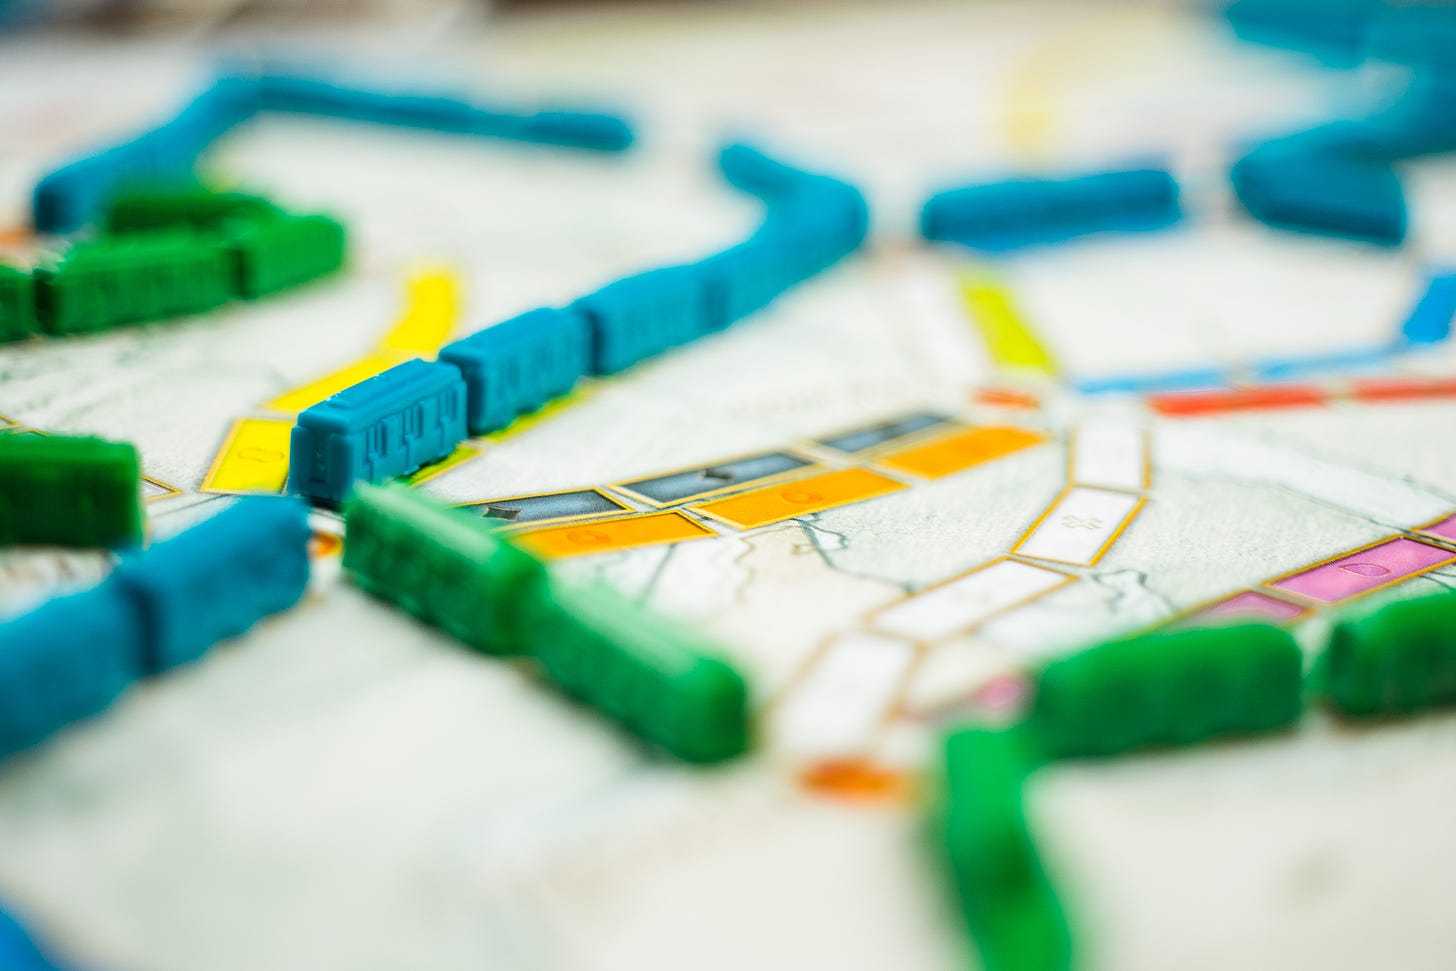 The board game Ticket to Ride, with blue and green trains crossing along the board.